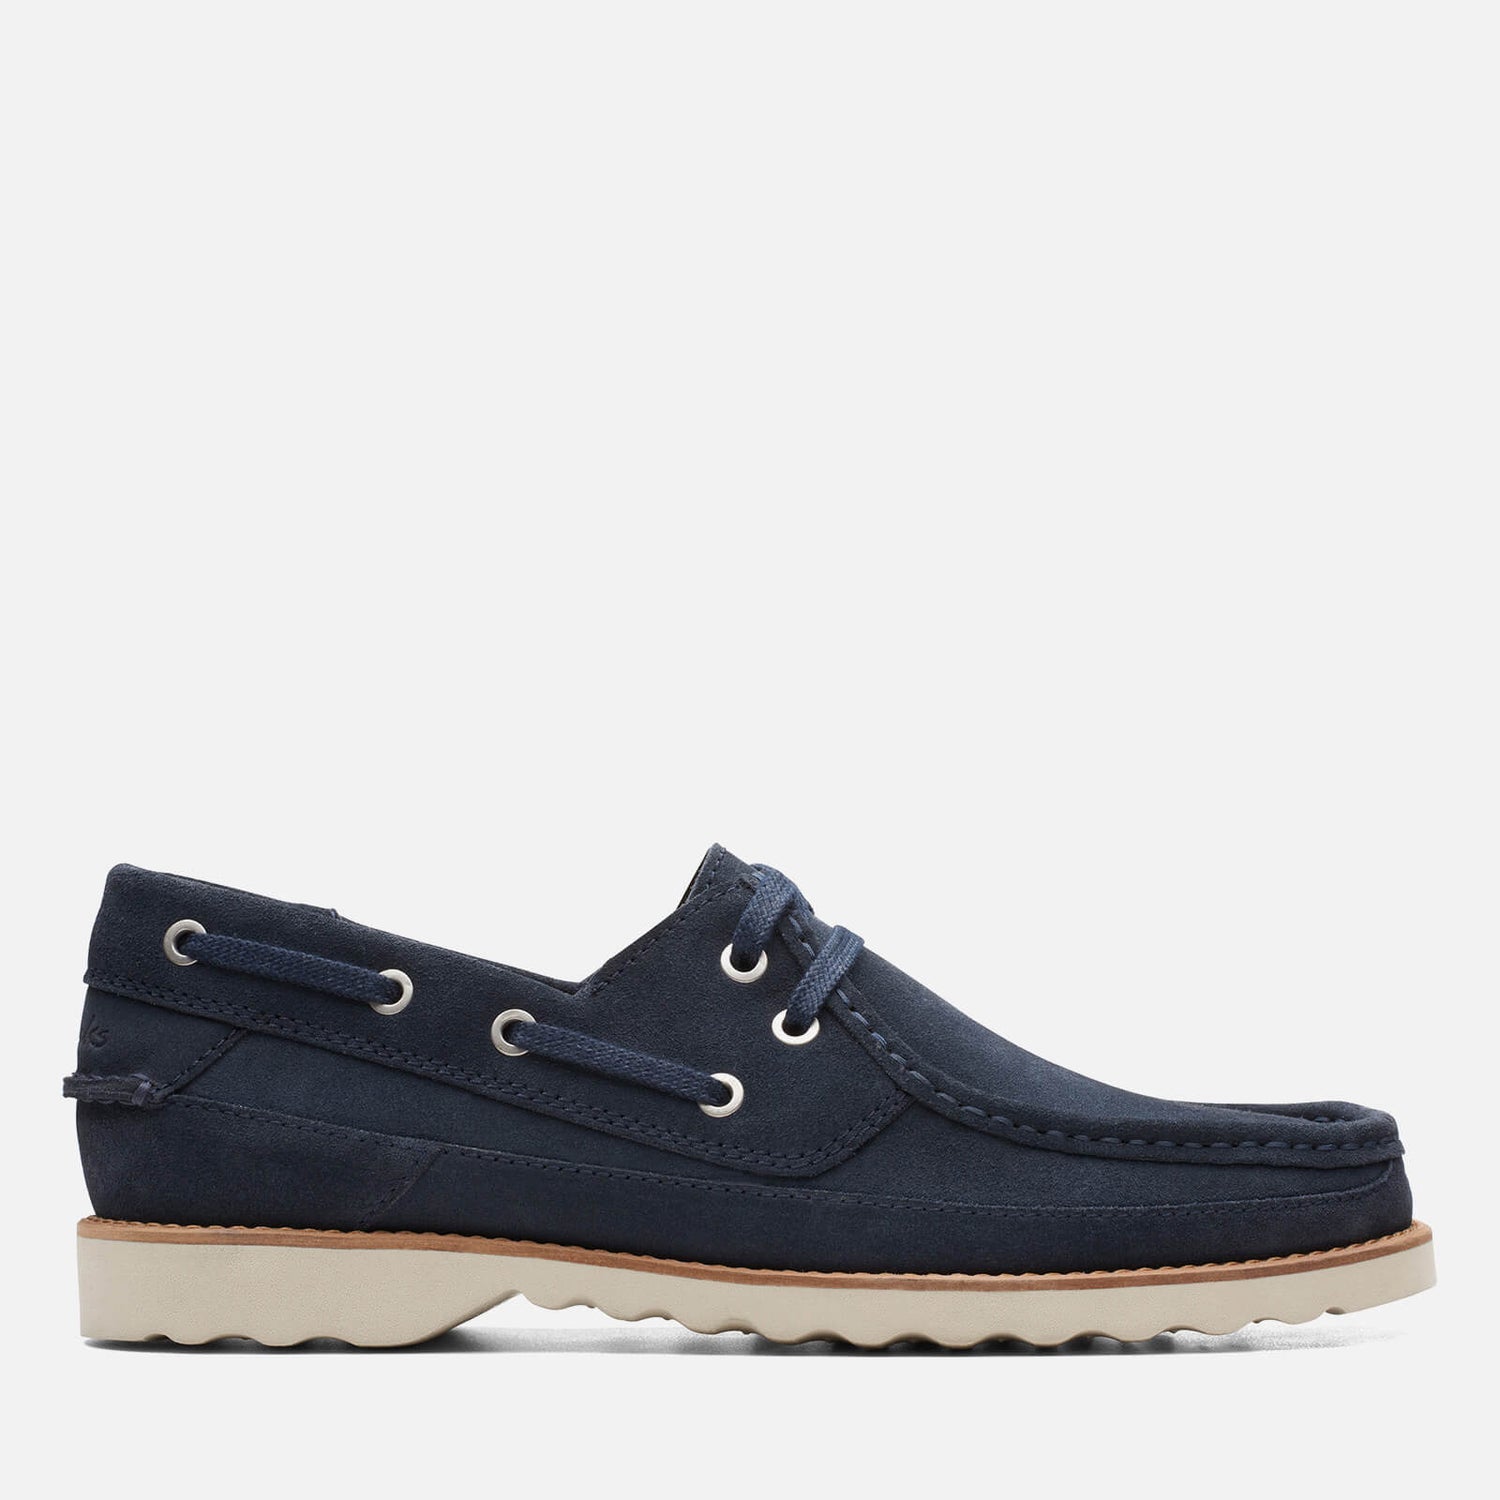 Clarks Men's Durleigh Sail Suede Boat Shoes - Navy - UK 7